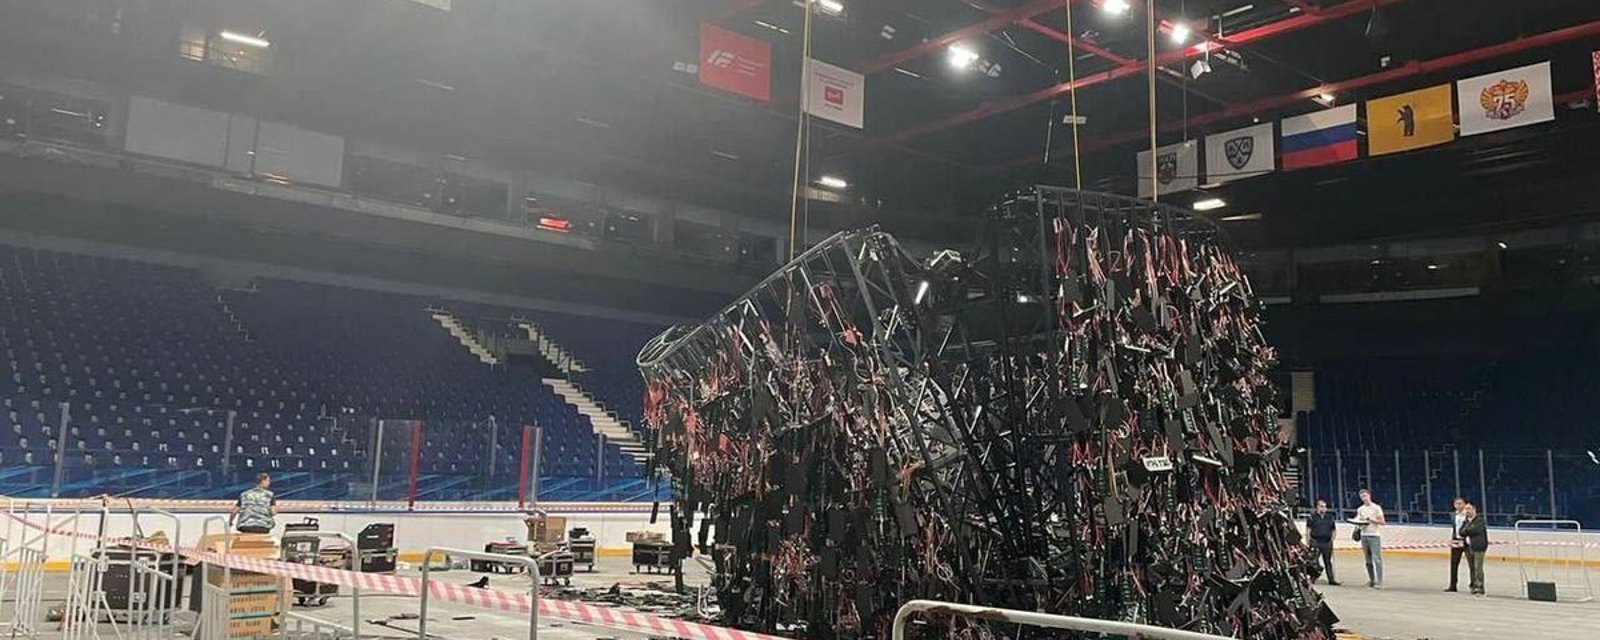 Jumbotron collapses during installation and injures worker!